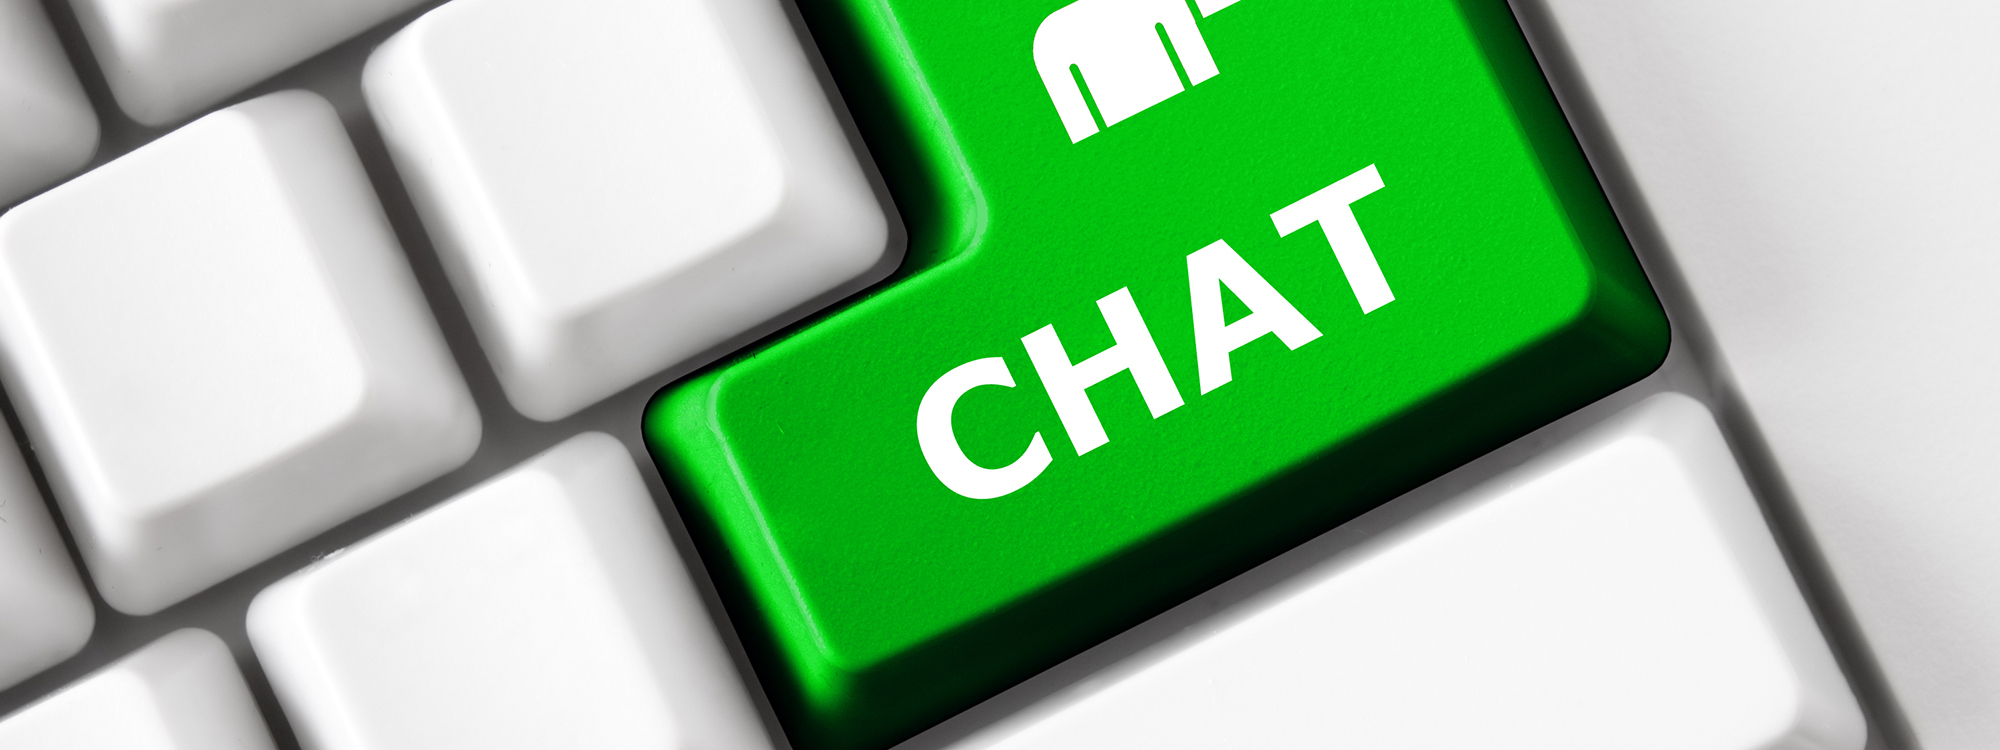 Schulich ExecEd website now features LiveChat to answer your questions